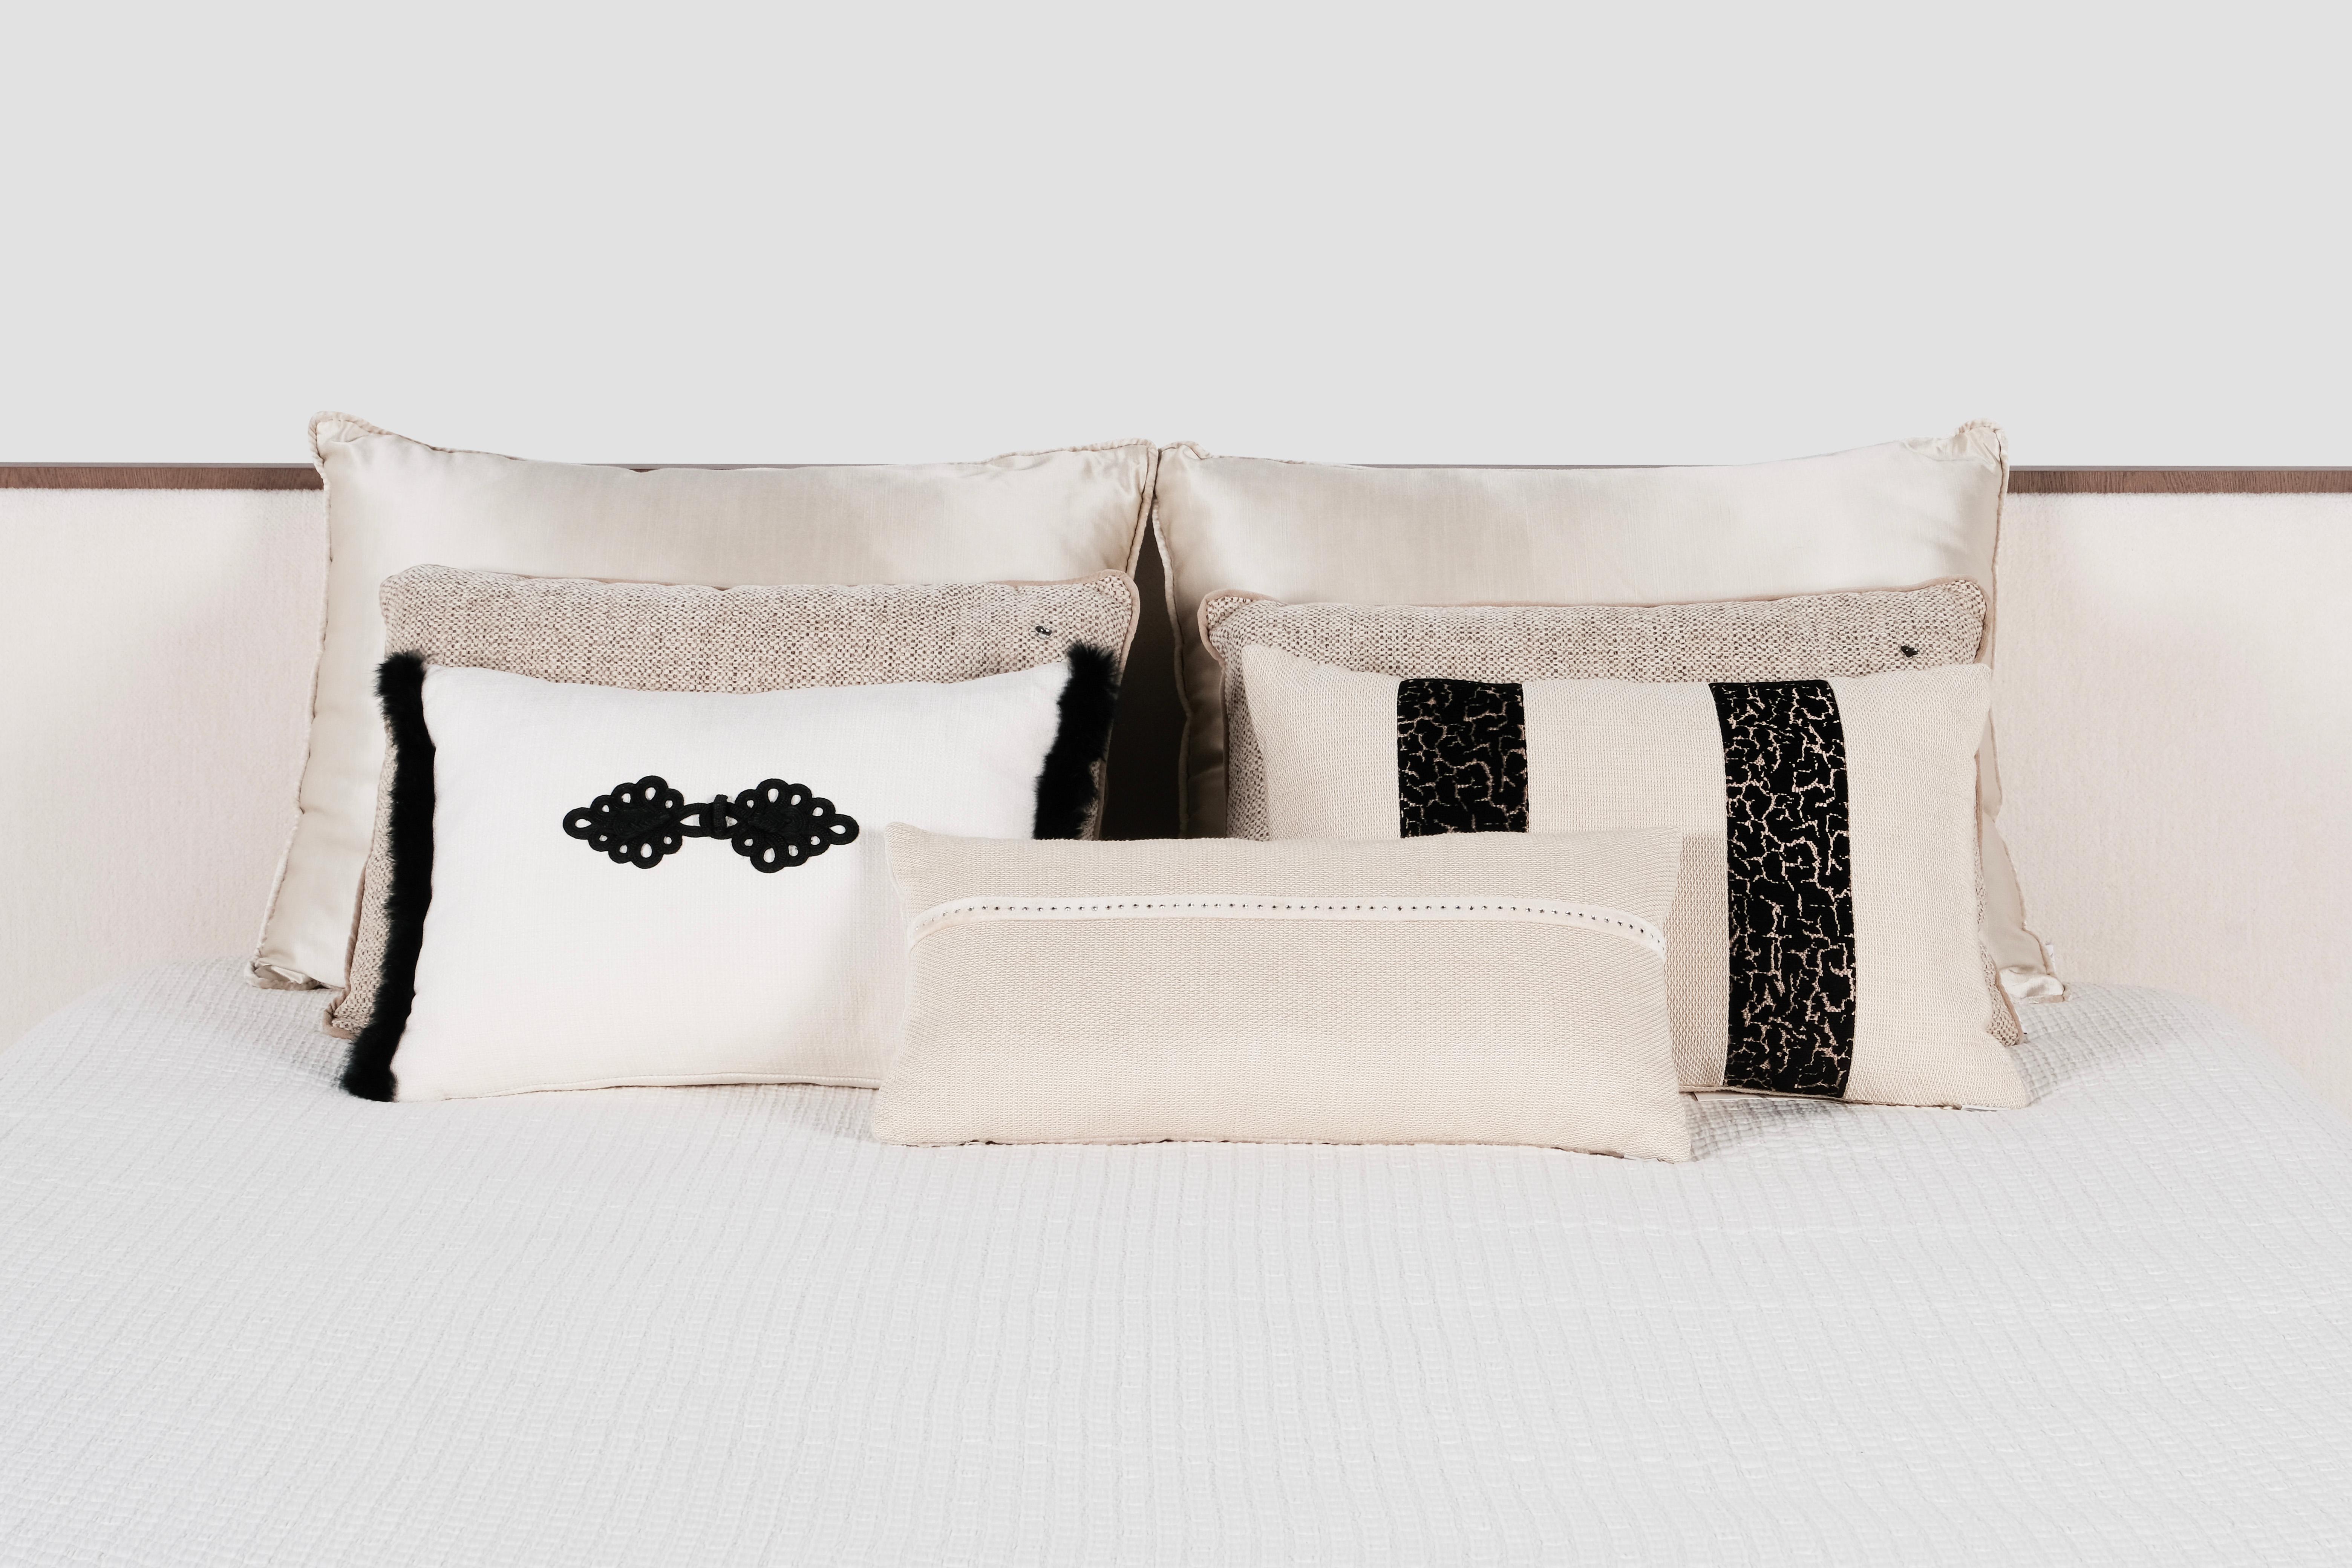 Set/7 Decorative Pillows, Lusitanus Home Collection by Greenapple.

Handmade decorative pillow set with exquisite details.

2x 908928 Rectangular decorative cushion in cream satin.
Dimensions:
W.75 x H.55 cm / W.29.53 x H.21.65 in

2x 908841